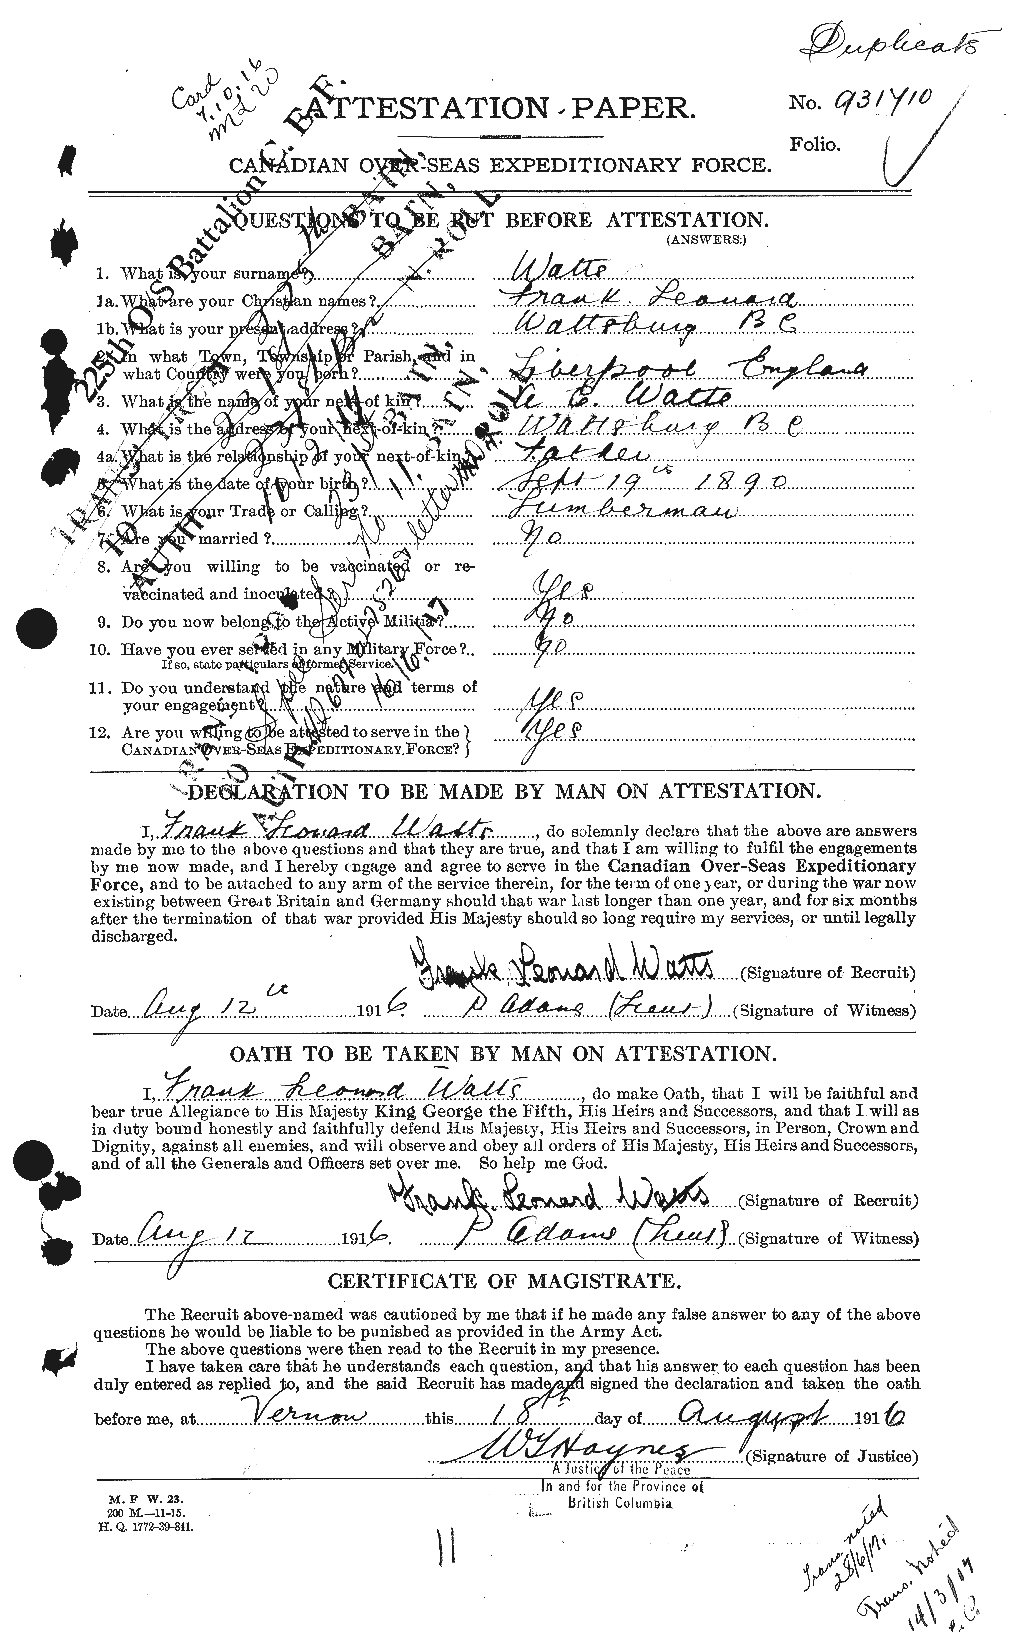 Personnel Records of the First World War - CEF 662760a